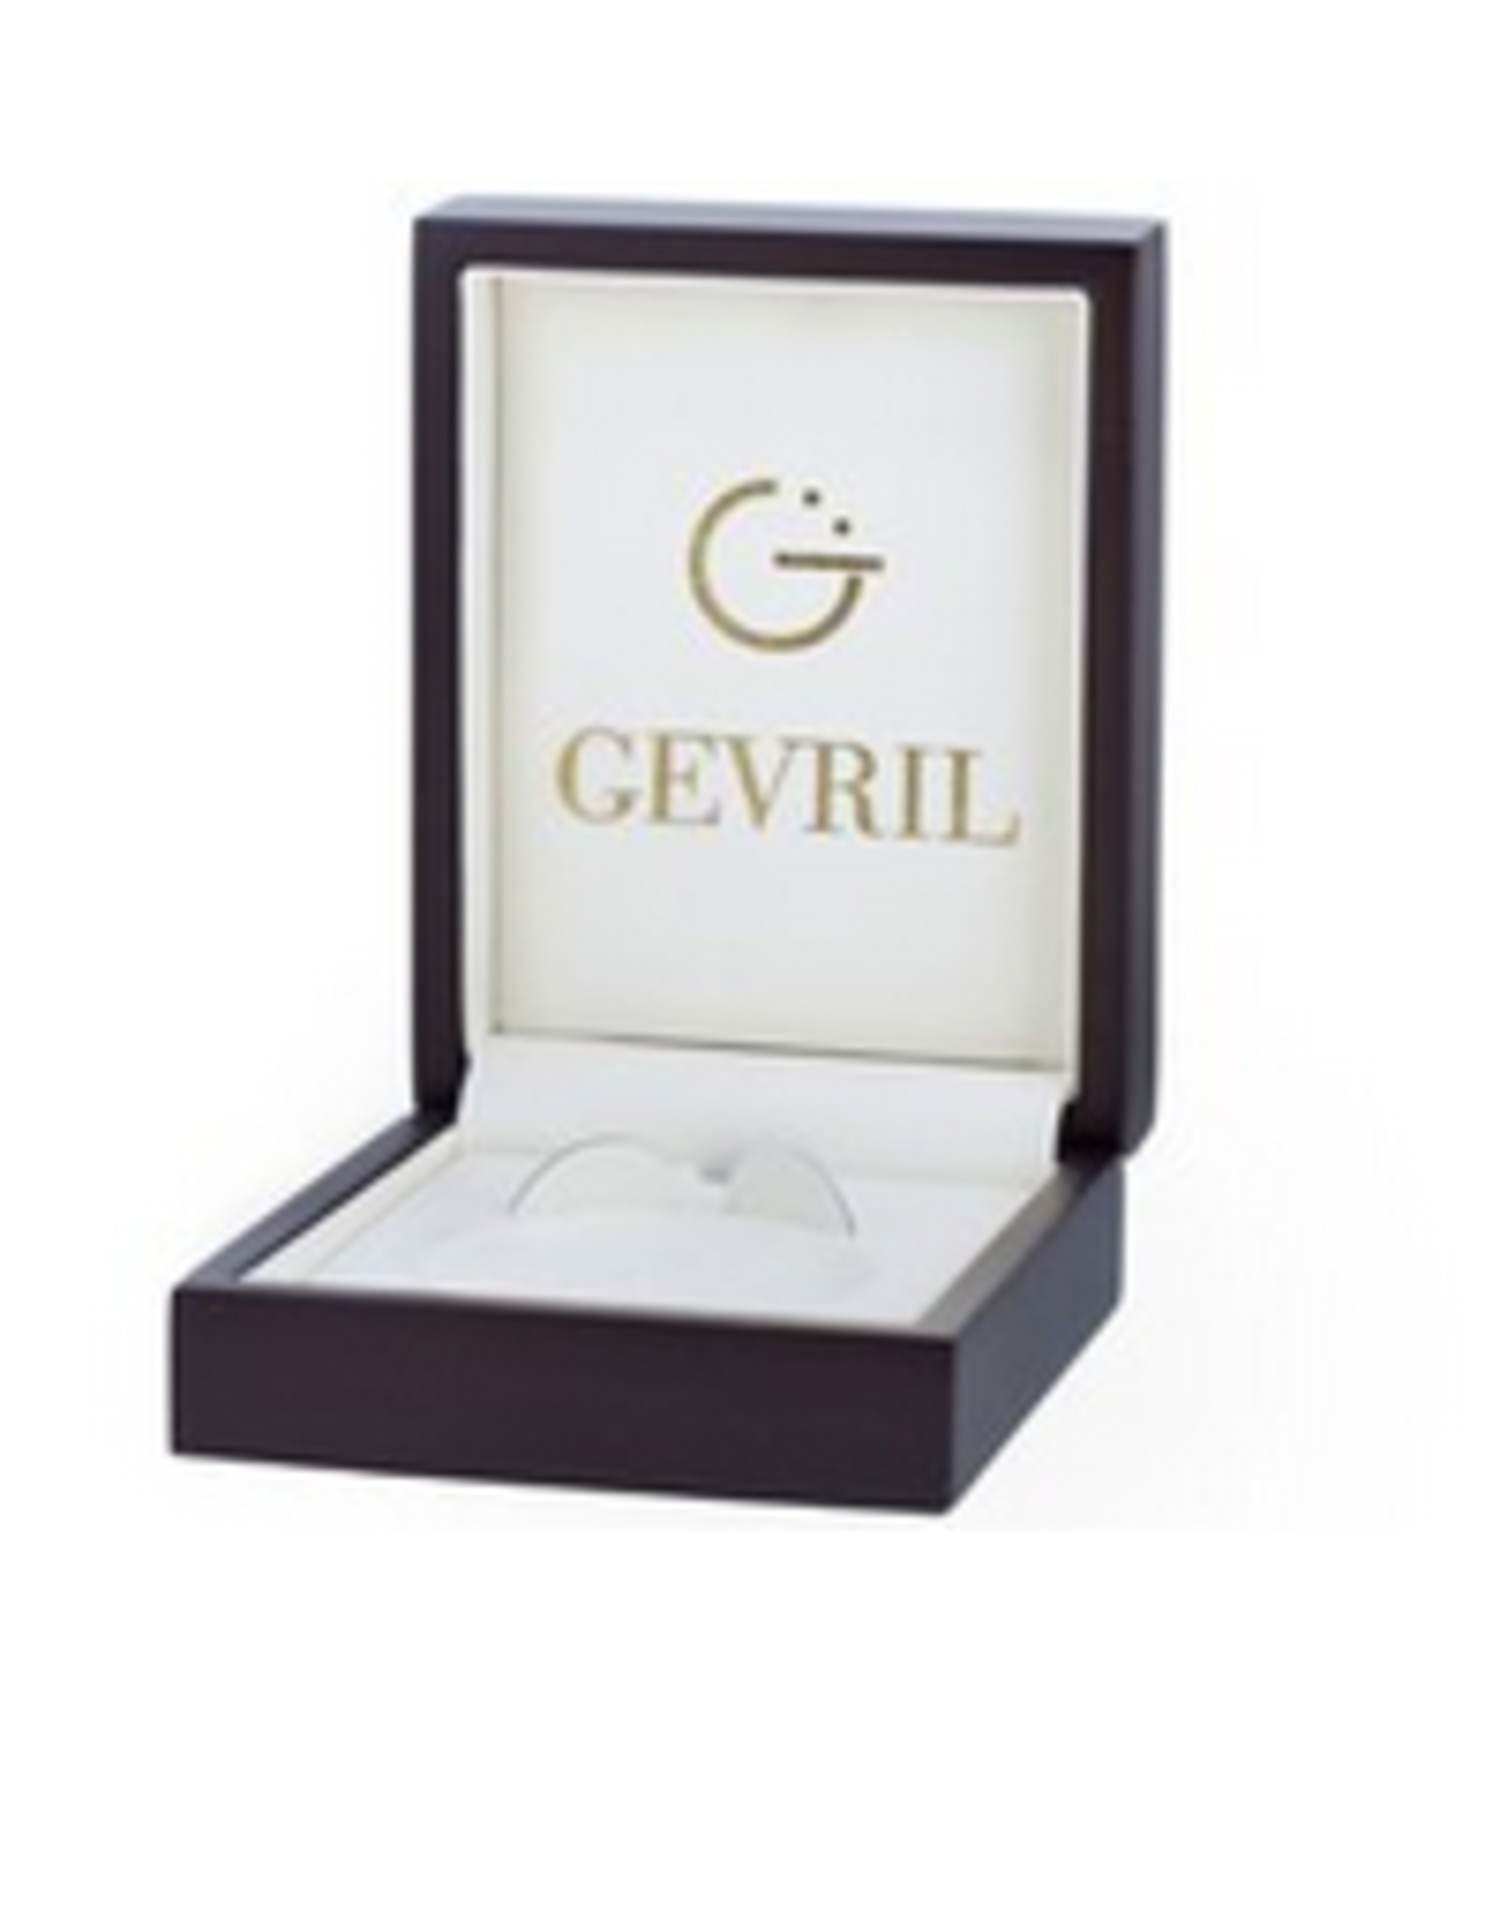 Gevril "1758 Collection" Mens Silver analogue Watch - Image 2 of 2